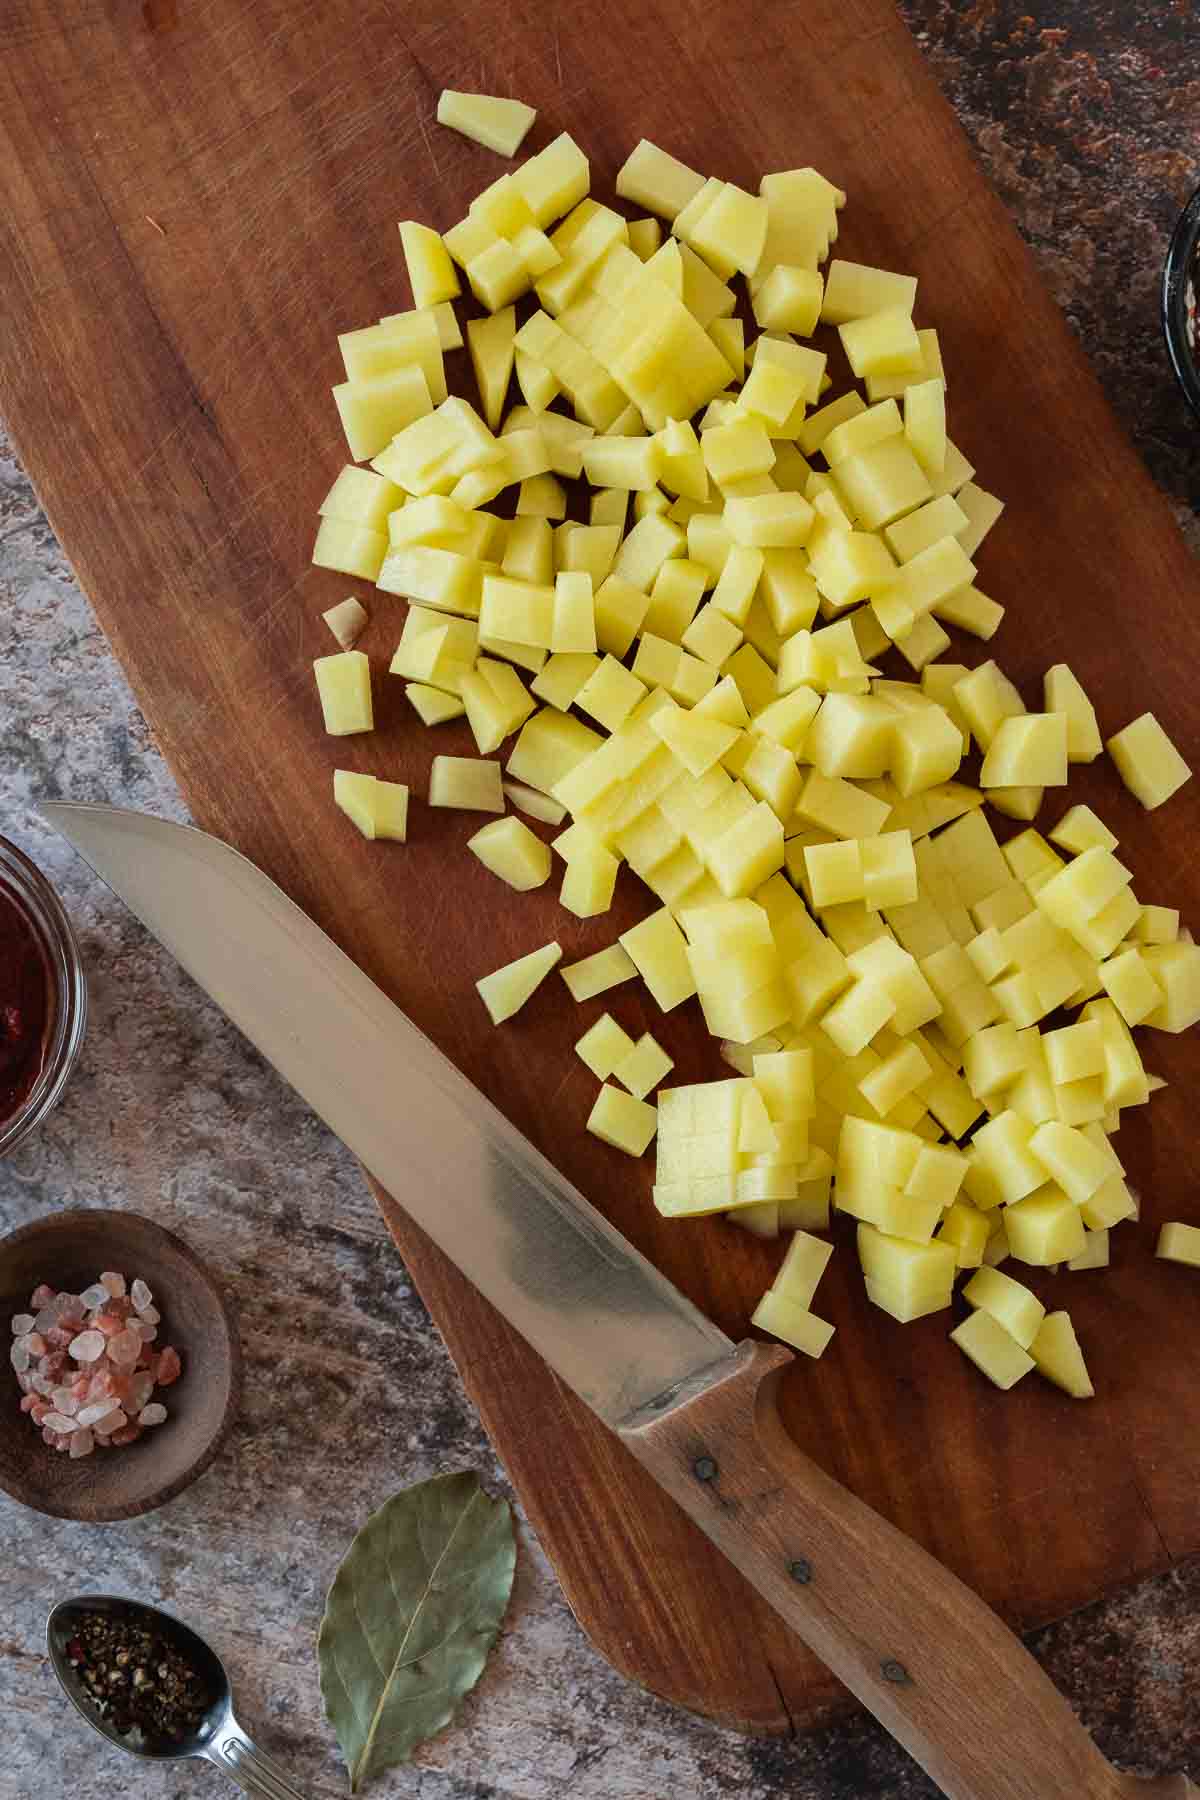 Diced potatoes on wooden board.